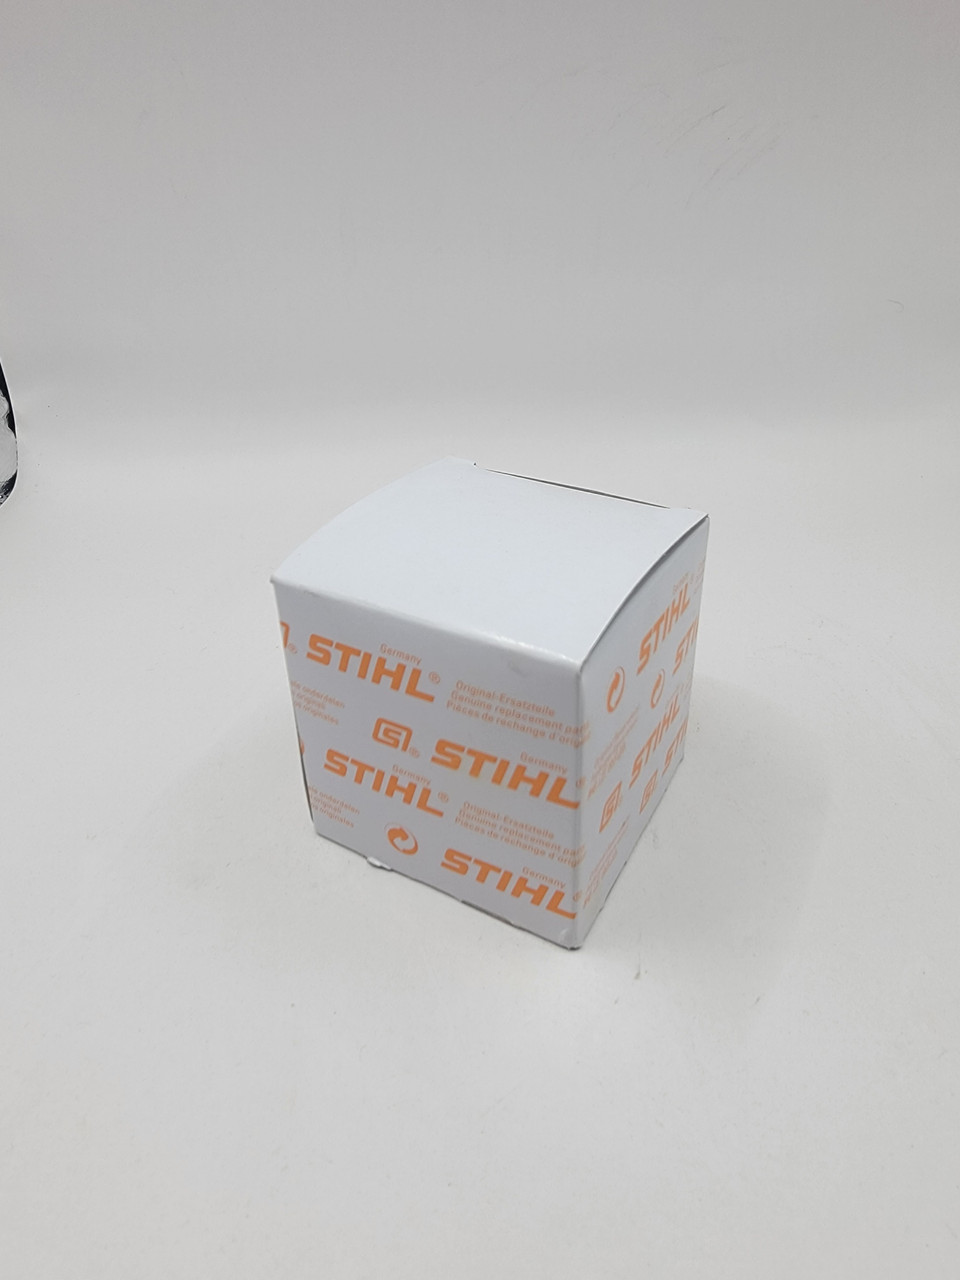 Stihl 4244 700 0807 CONTAINER 20I SR 450 one package